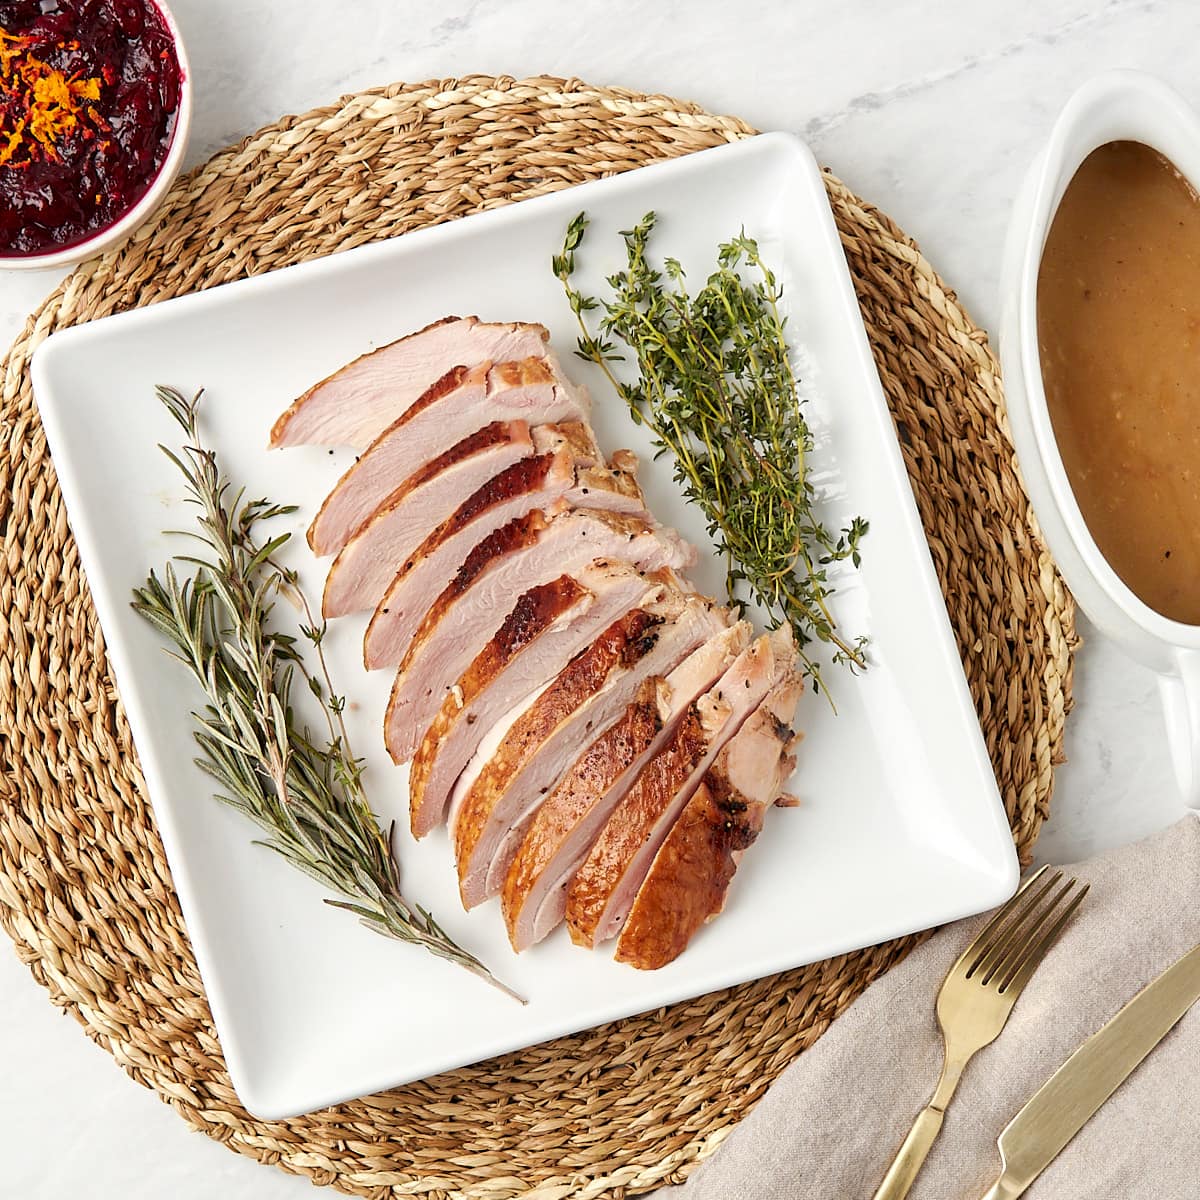 sliced turkey breast on a plate with a side of cranberry sauce and gravy.